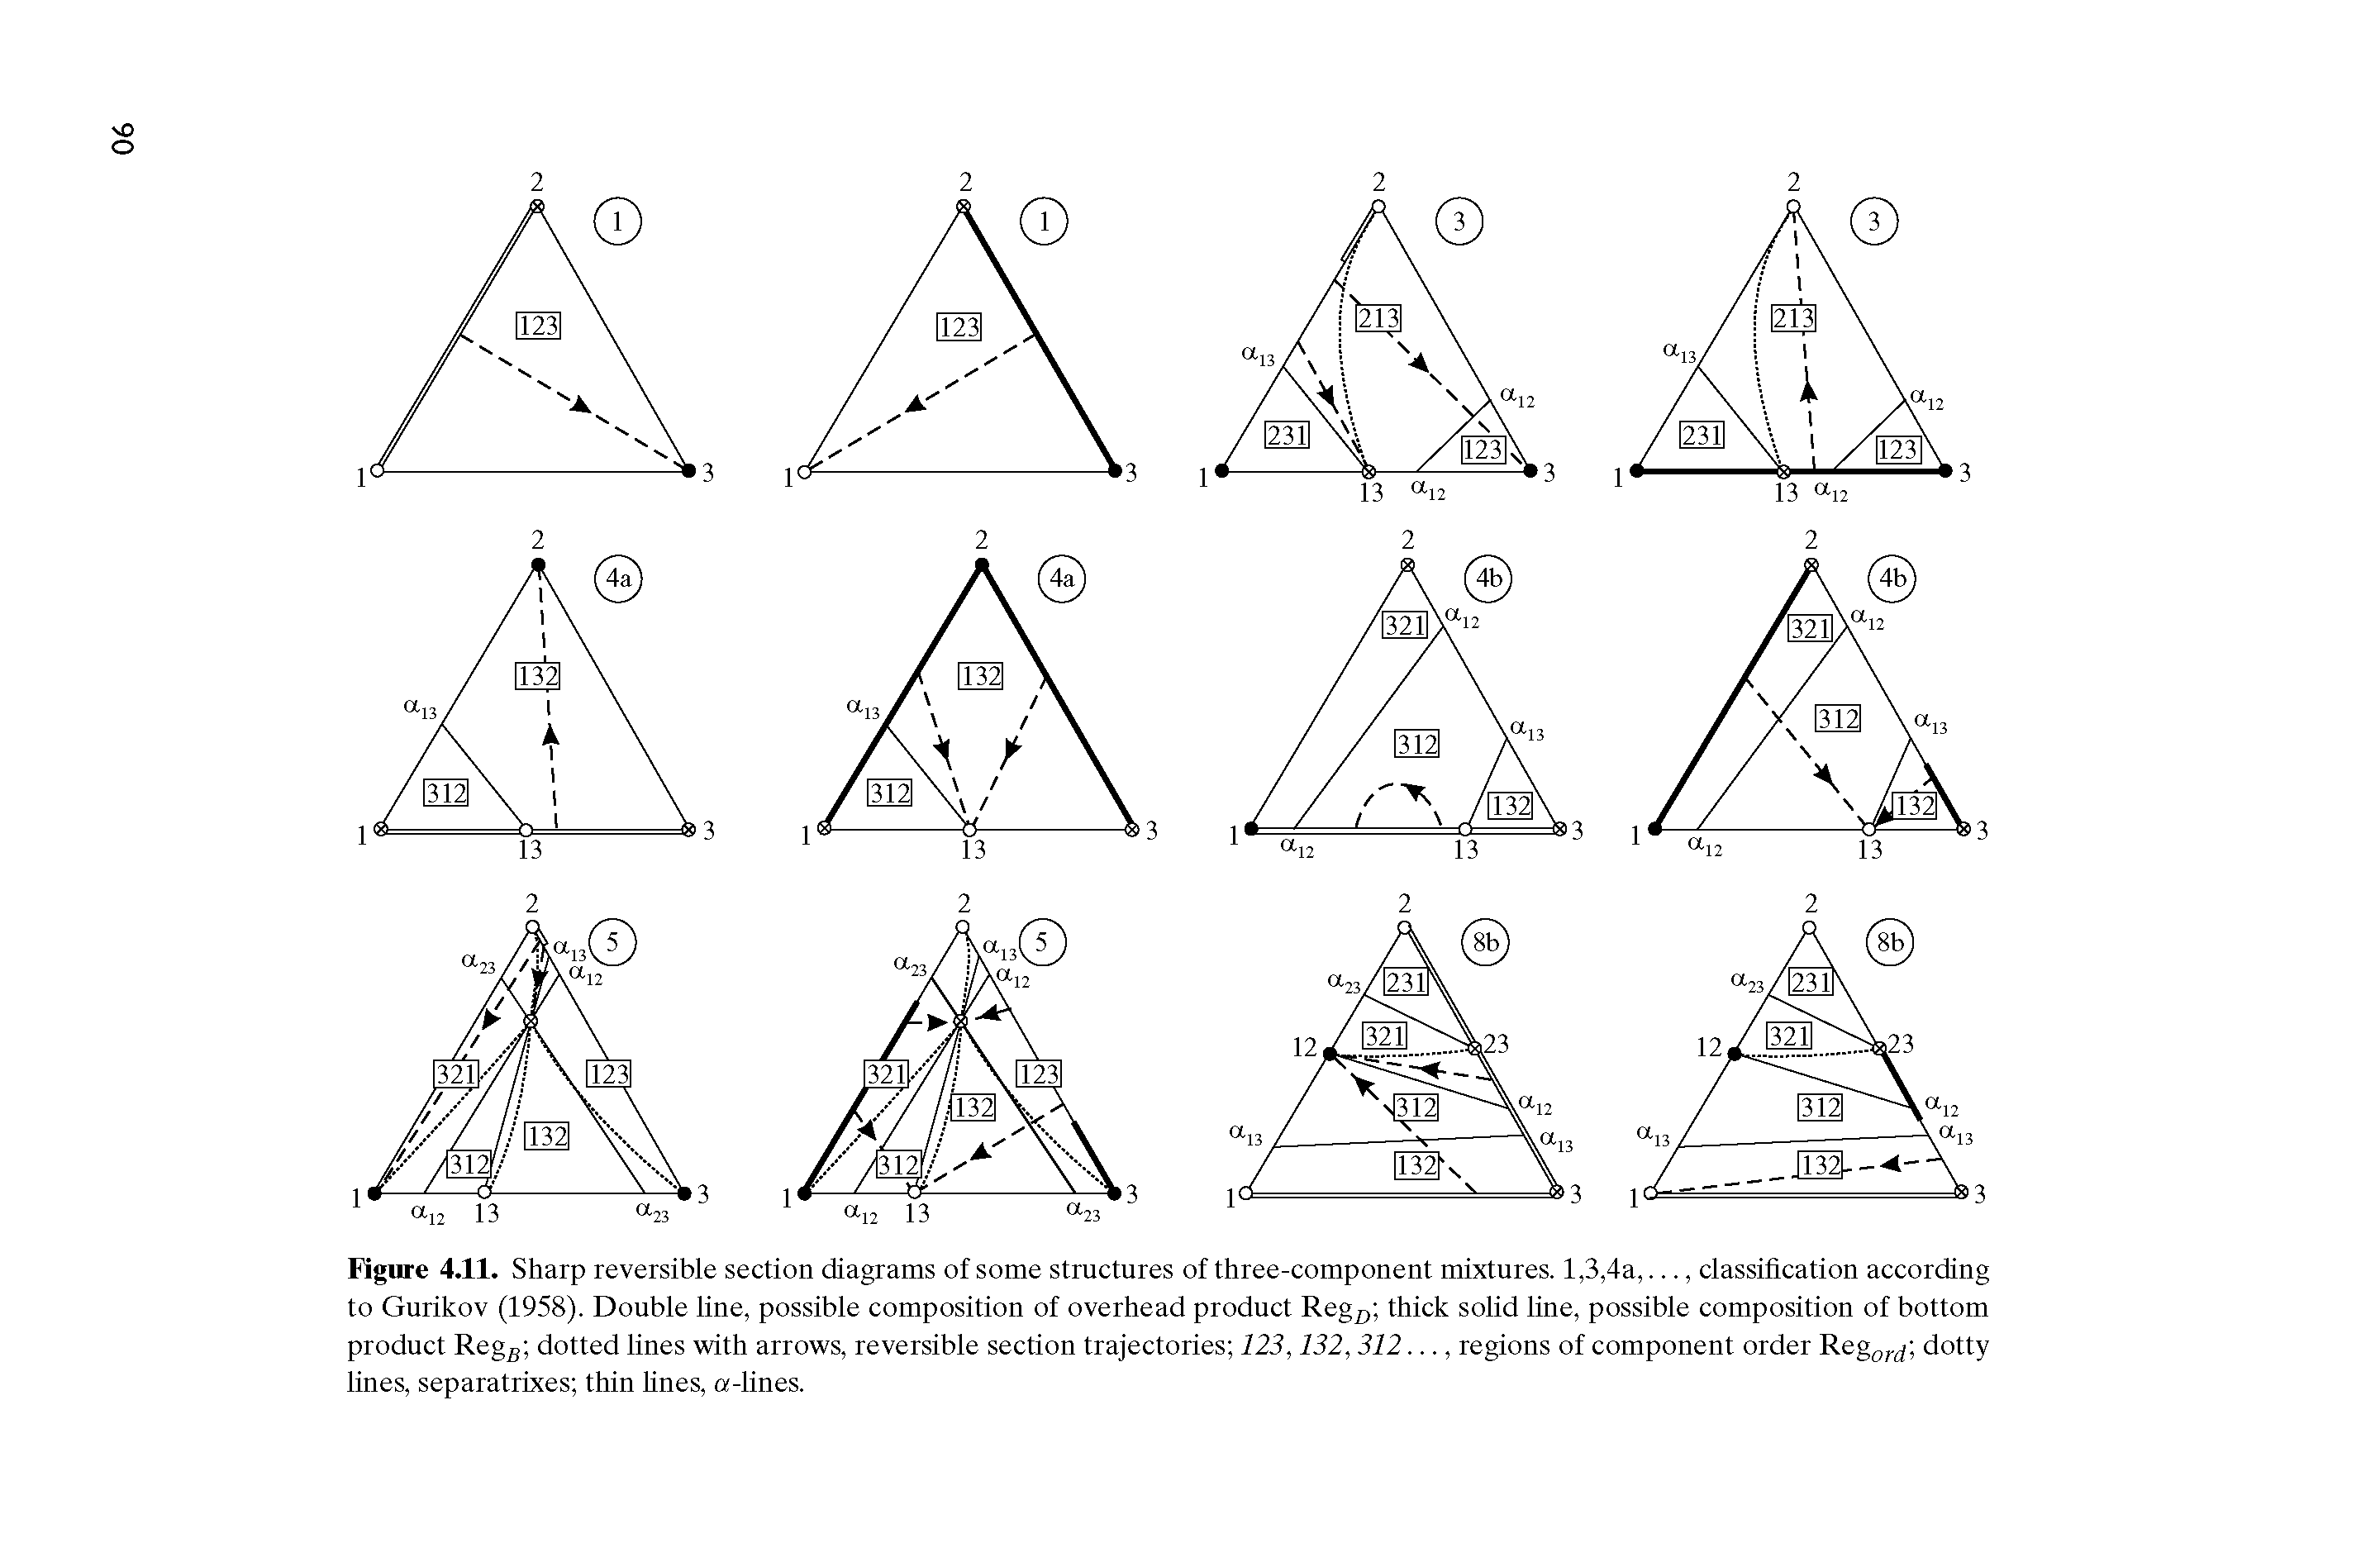 Figure 4.11. Sharp reversible section diagrams of some structures of three-component mixtures. 1,3.4a,..., classification according to Gurikov (1958). Double line, possible composition of overhead product Reg thick solid line, possible composition of bottom product Reg dotted lines with arrows, reversible section trajectories 123,132,312. regions of component order Reg dotty lines, separatrixes thin hues, a-lines.